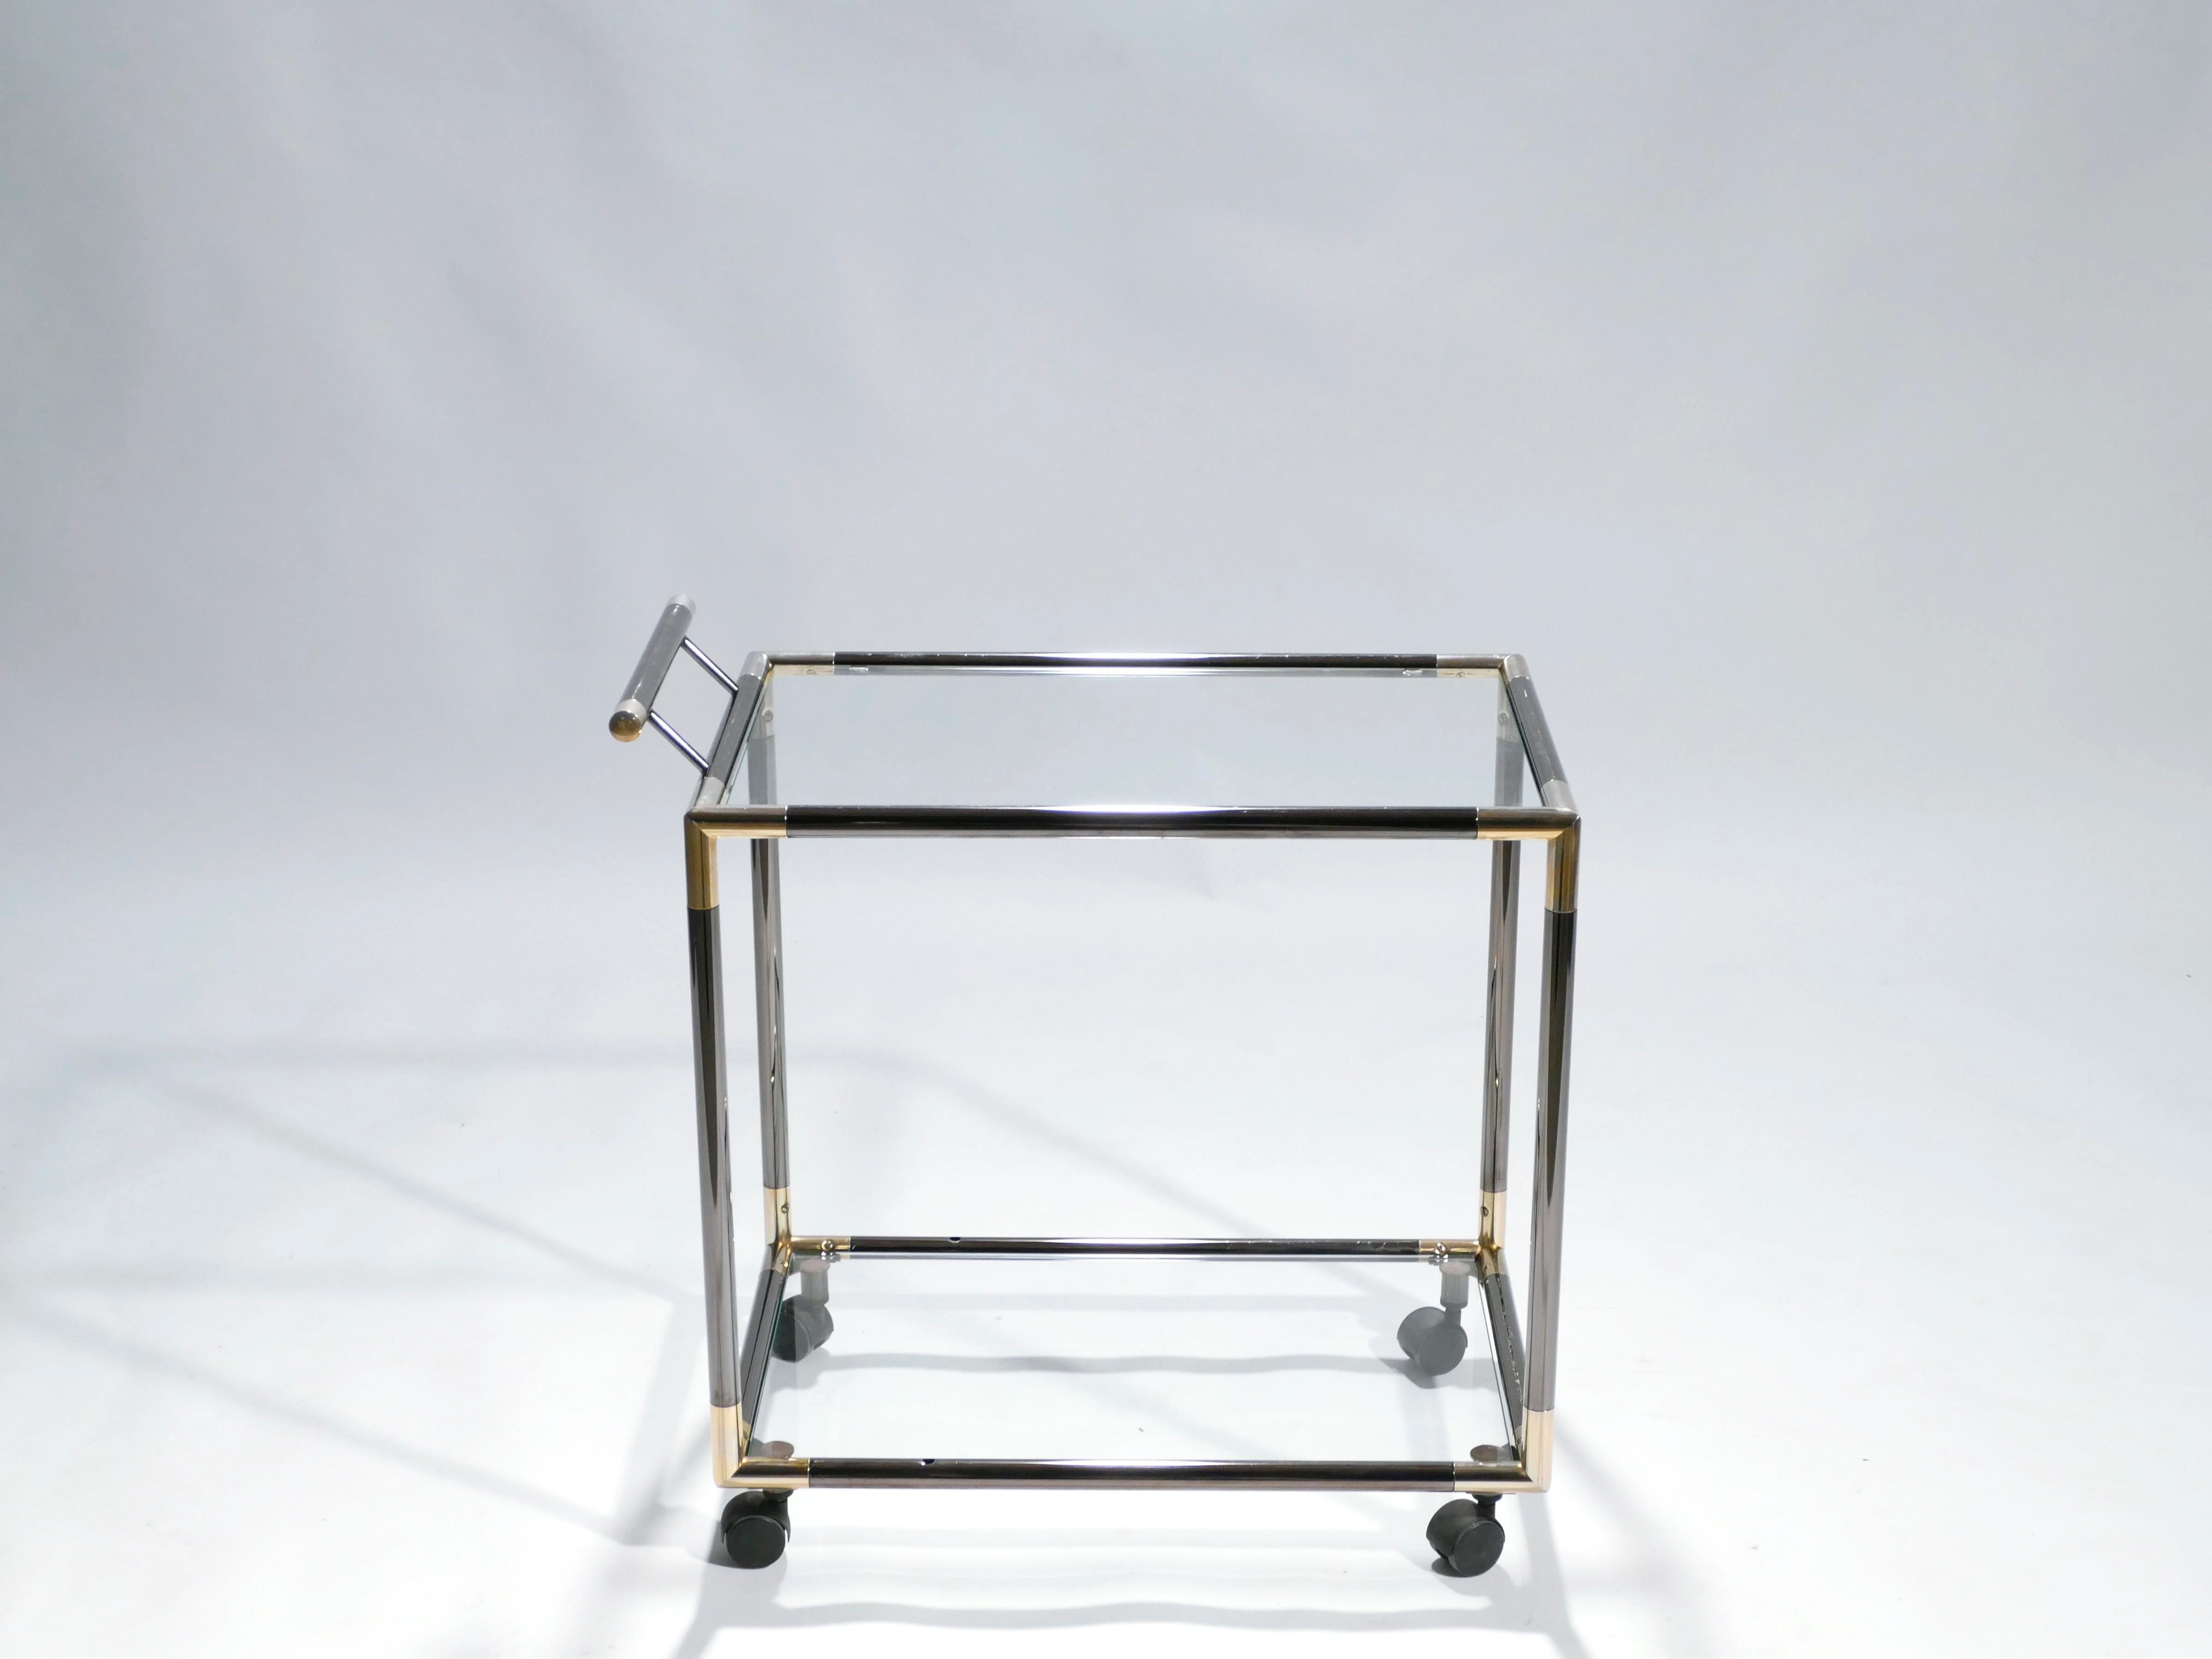 The designer of this pair of gunmetal and brass bar cart aimed to emulate the simple structure and visual drama of Maison Jansen’s iconic style. Sleek lines and an ordinary rectangular structure are offset by bright brass joints at all four corners.